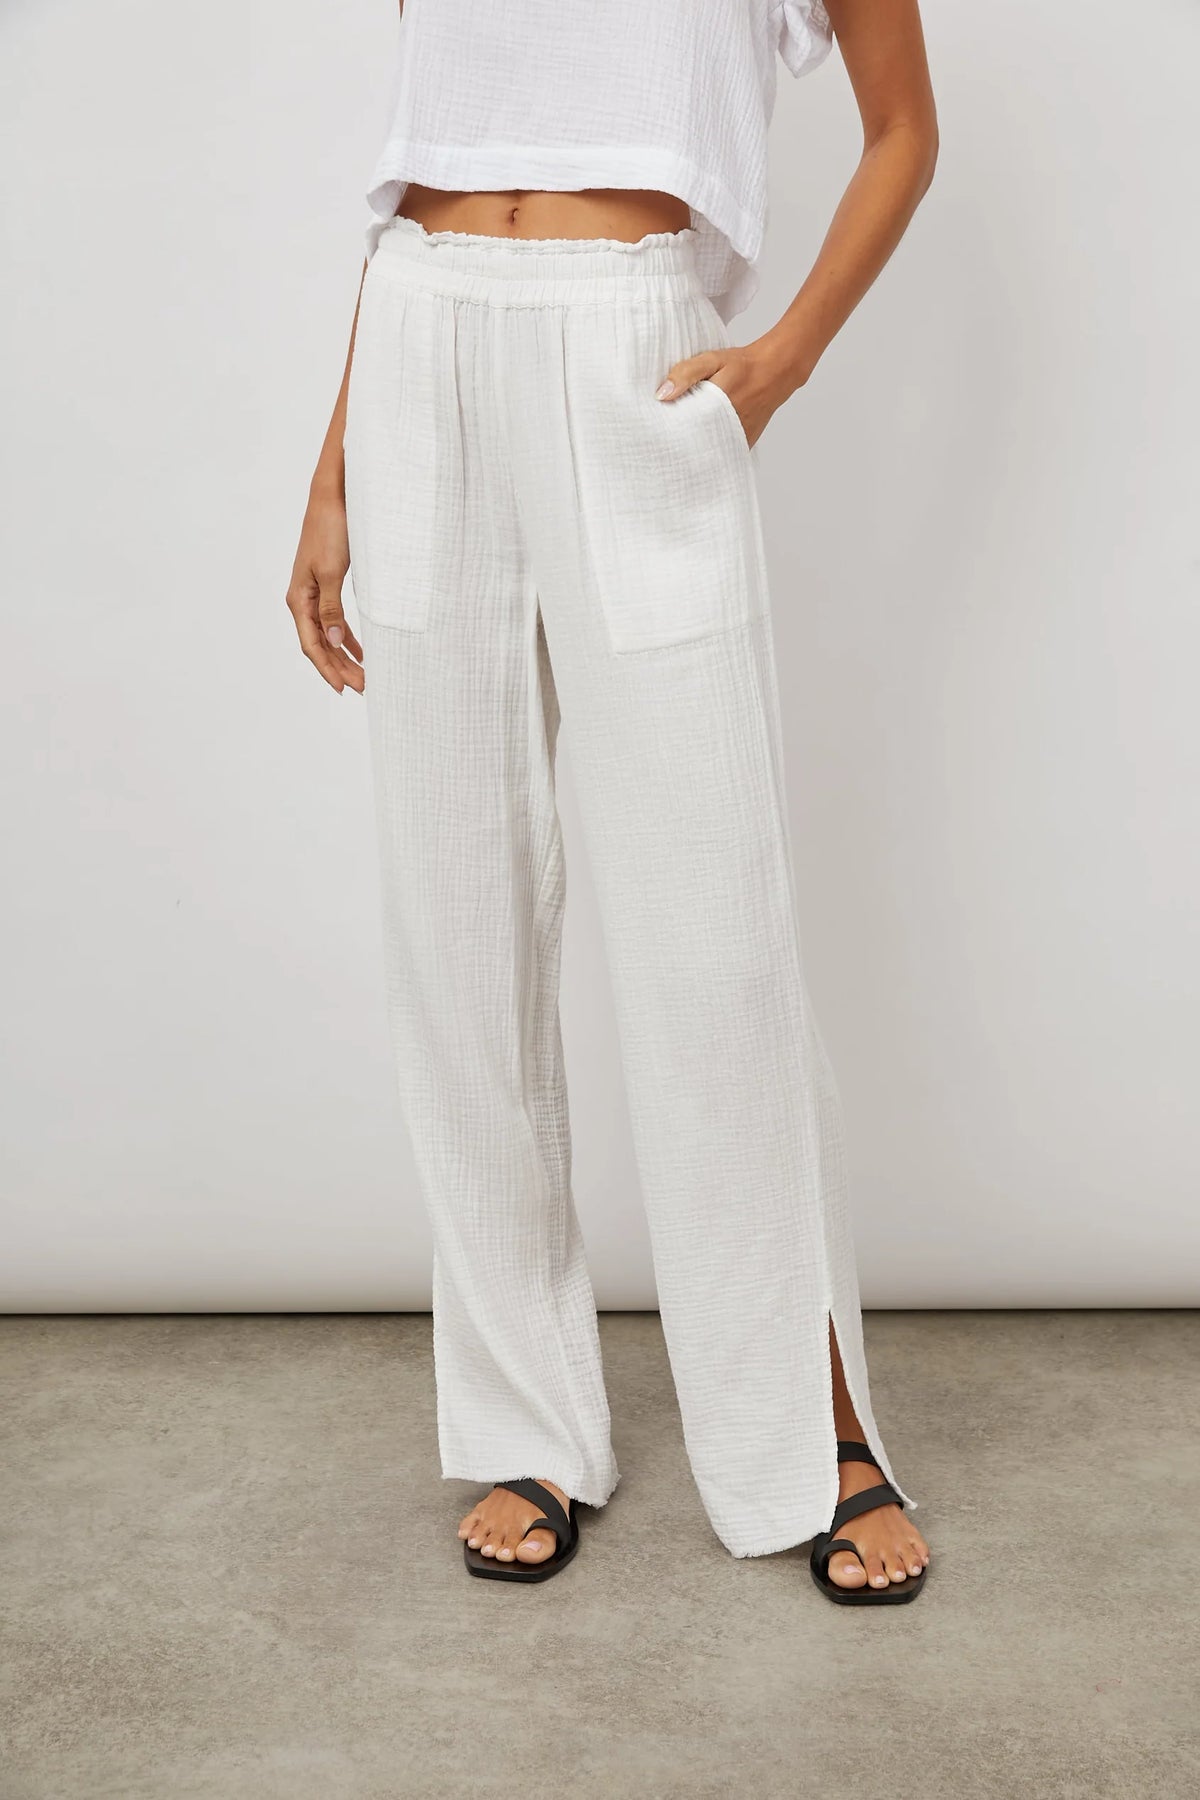 Long white cheese-cloth style wide leg trousers with side splits and elasticated waist with pockets